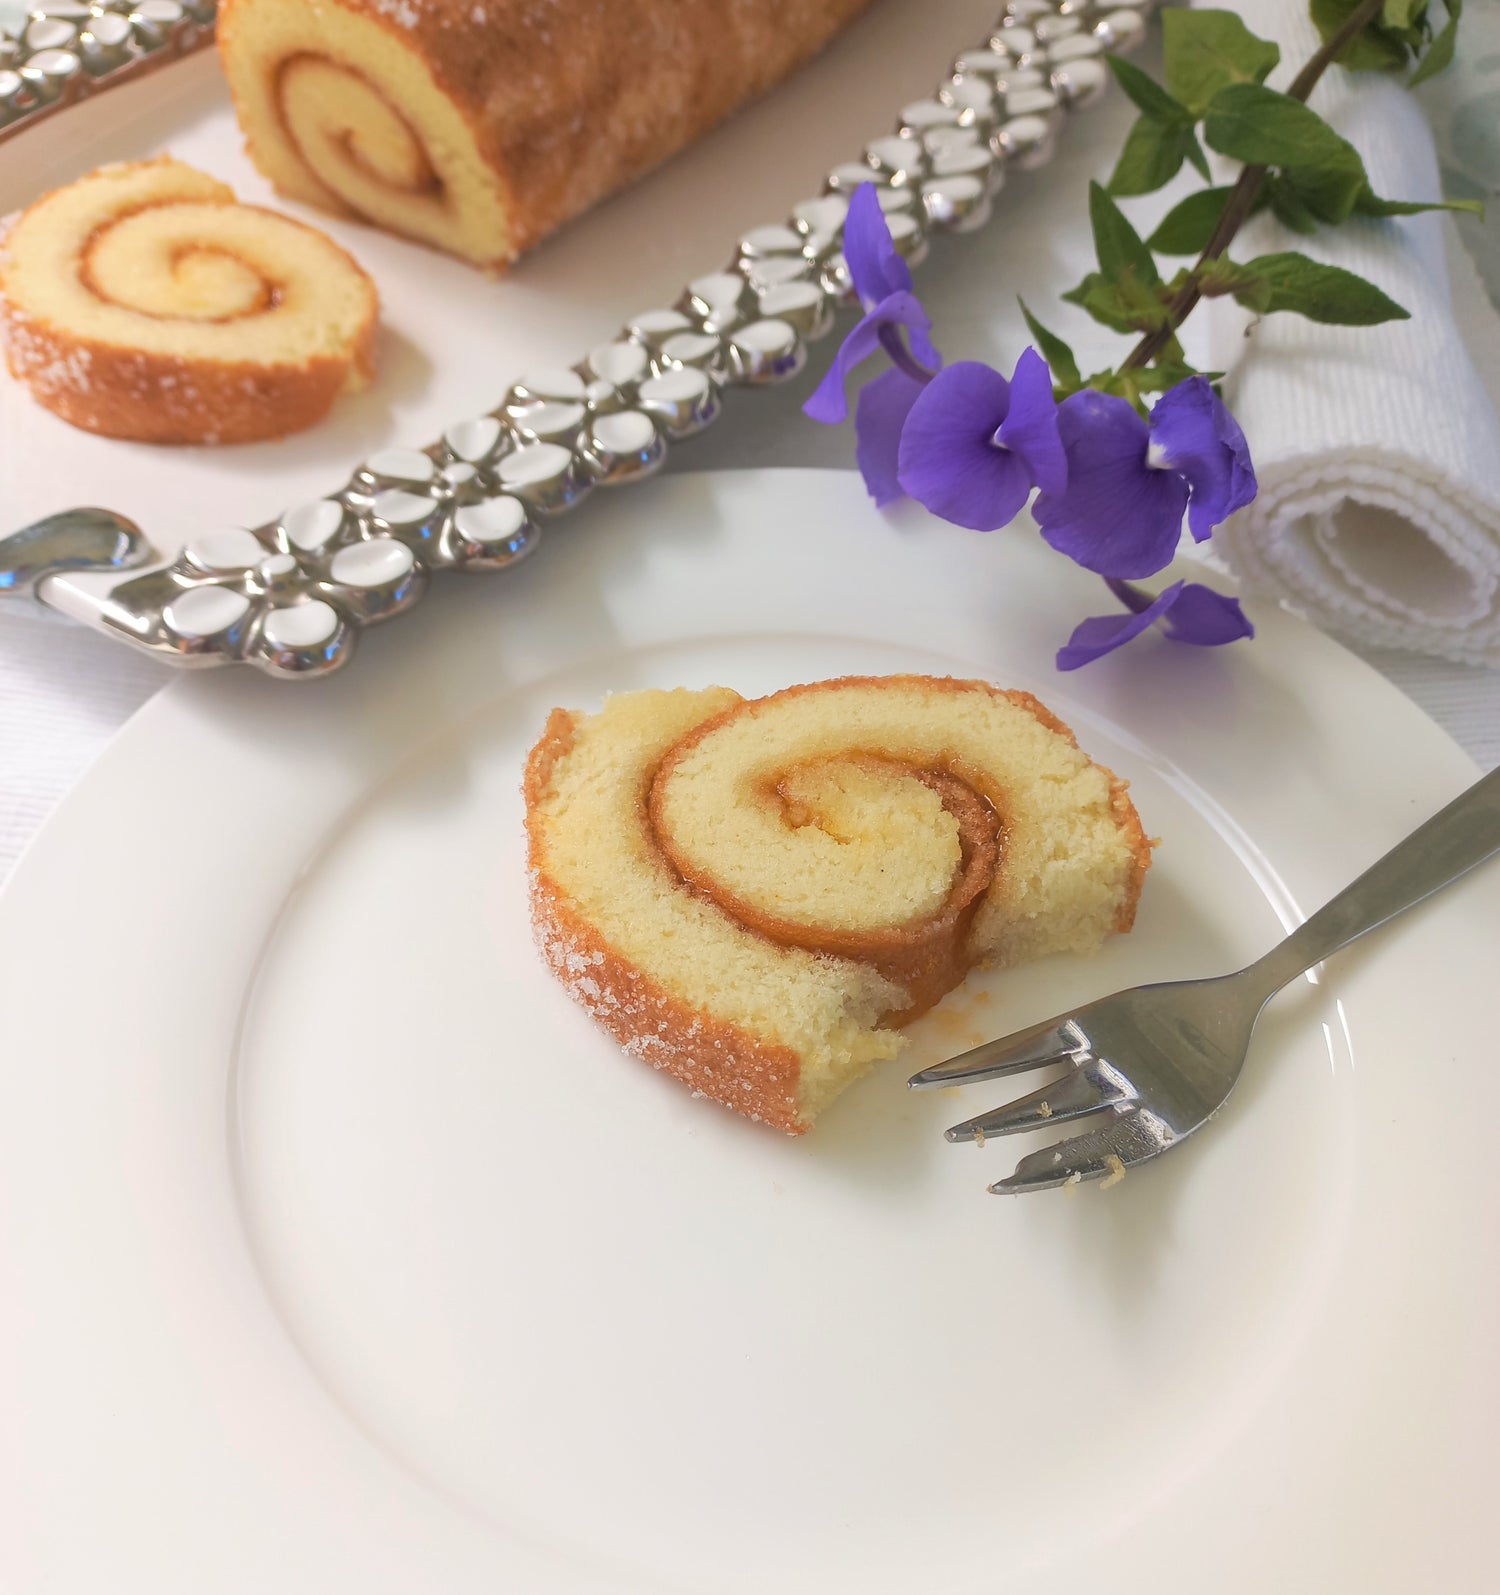 Swiss Roll (gluten-free and dairy-free). Made using Coleman Royal Bakeries Gluten-free Plain Flour. Recipe available.